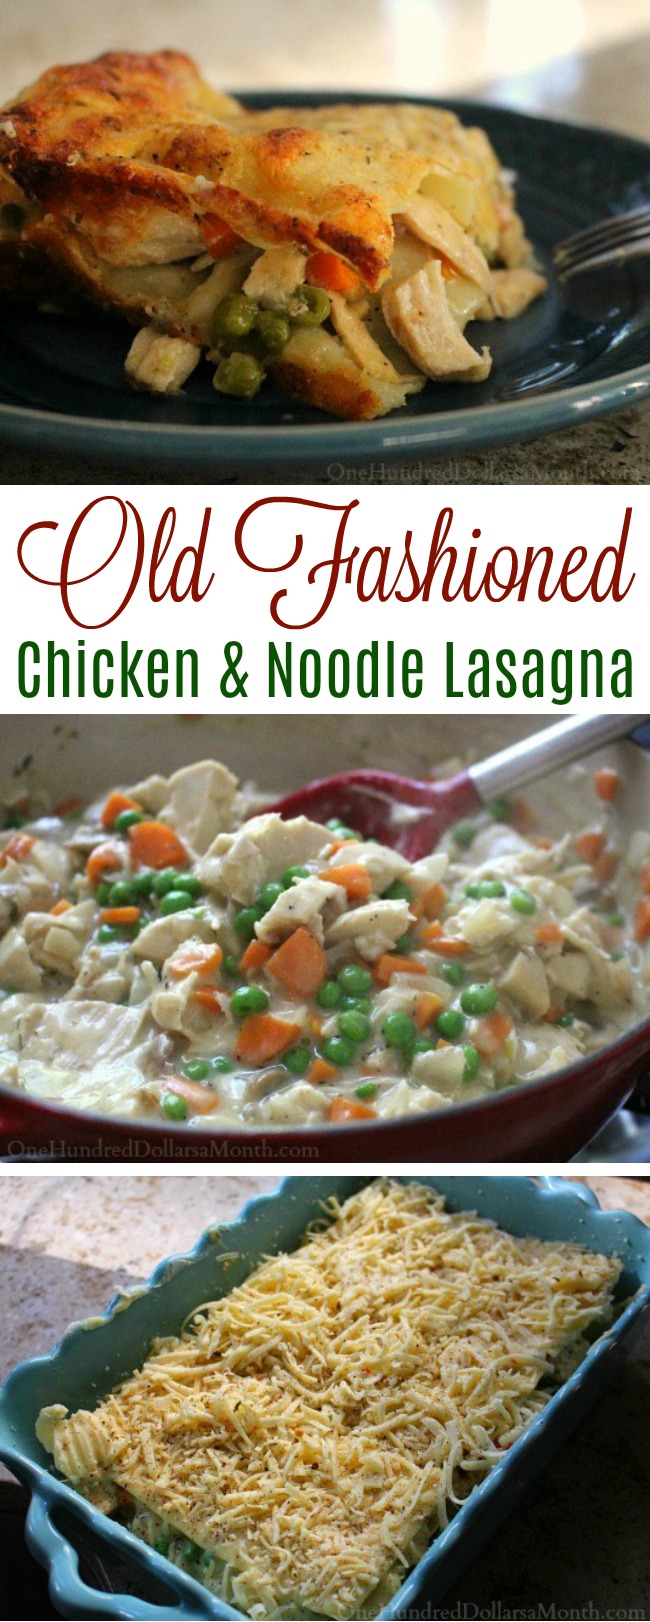 Old Fashioned Chicken and Noodle Lasagna